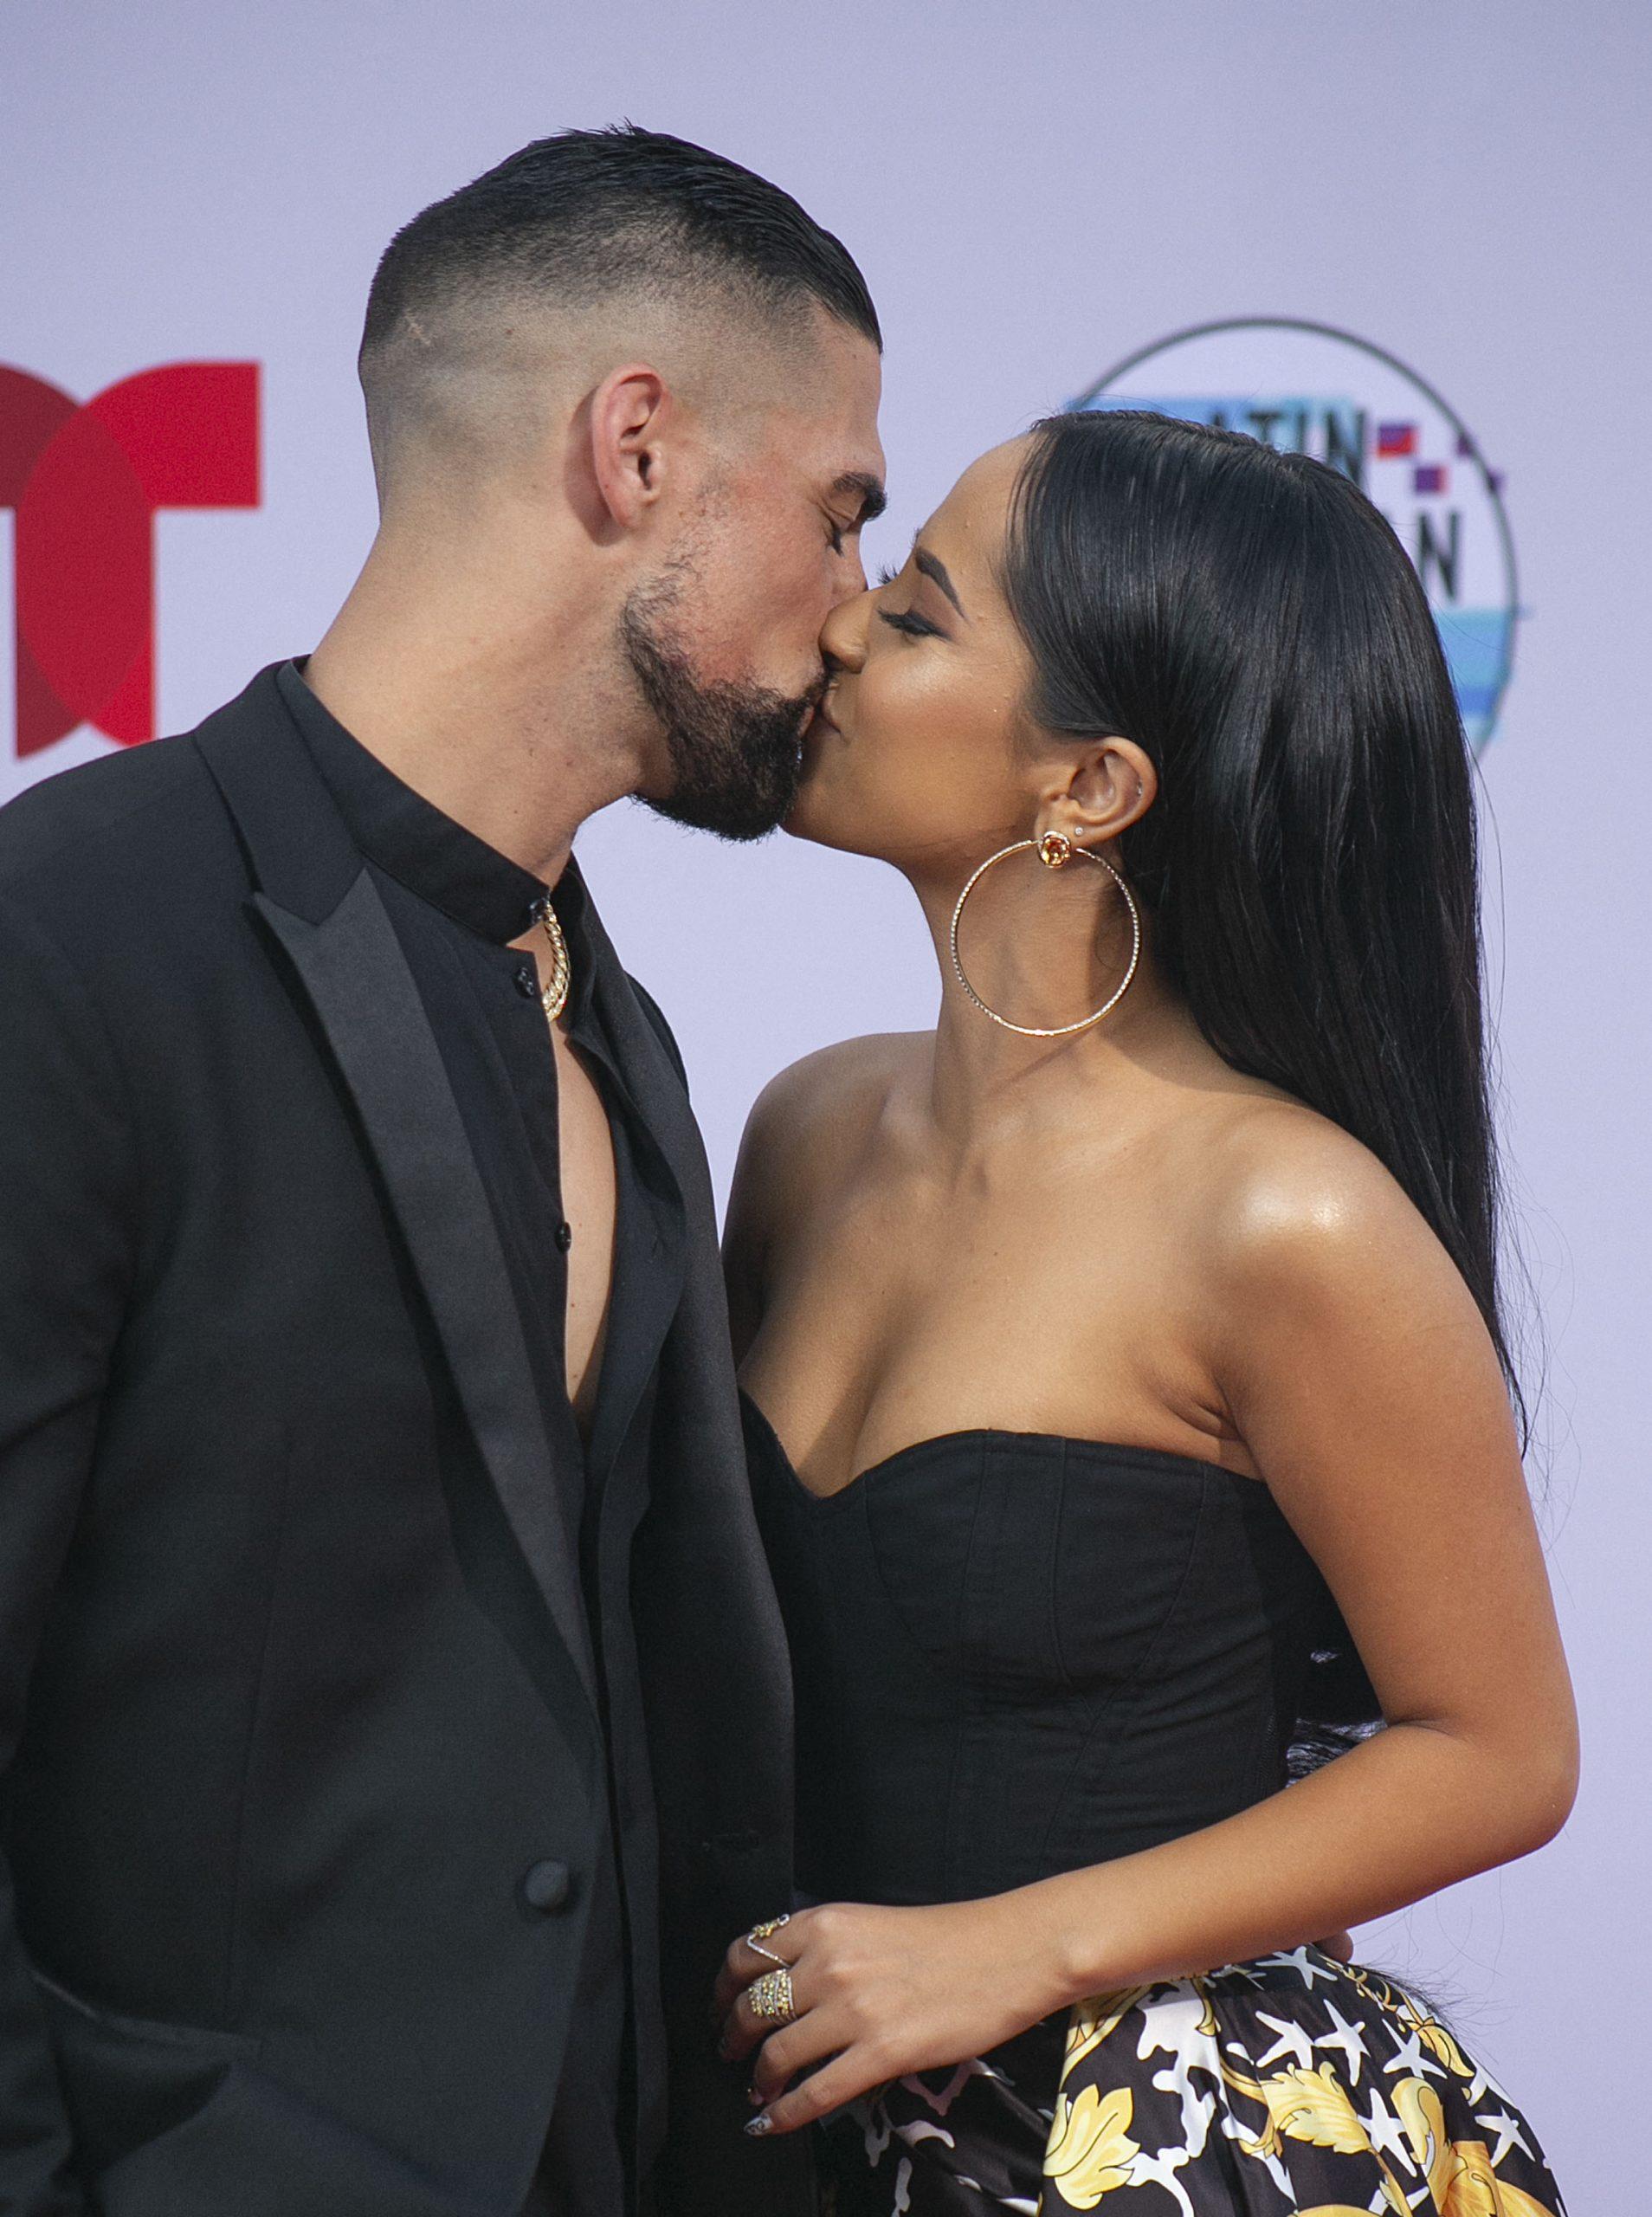 Becky G Spotted Without Her Engagement Ring Amid Cheating Allegations Against Her Fiancé Sebastian Lletget